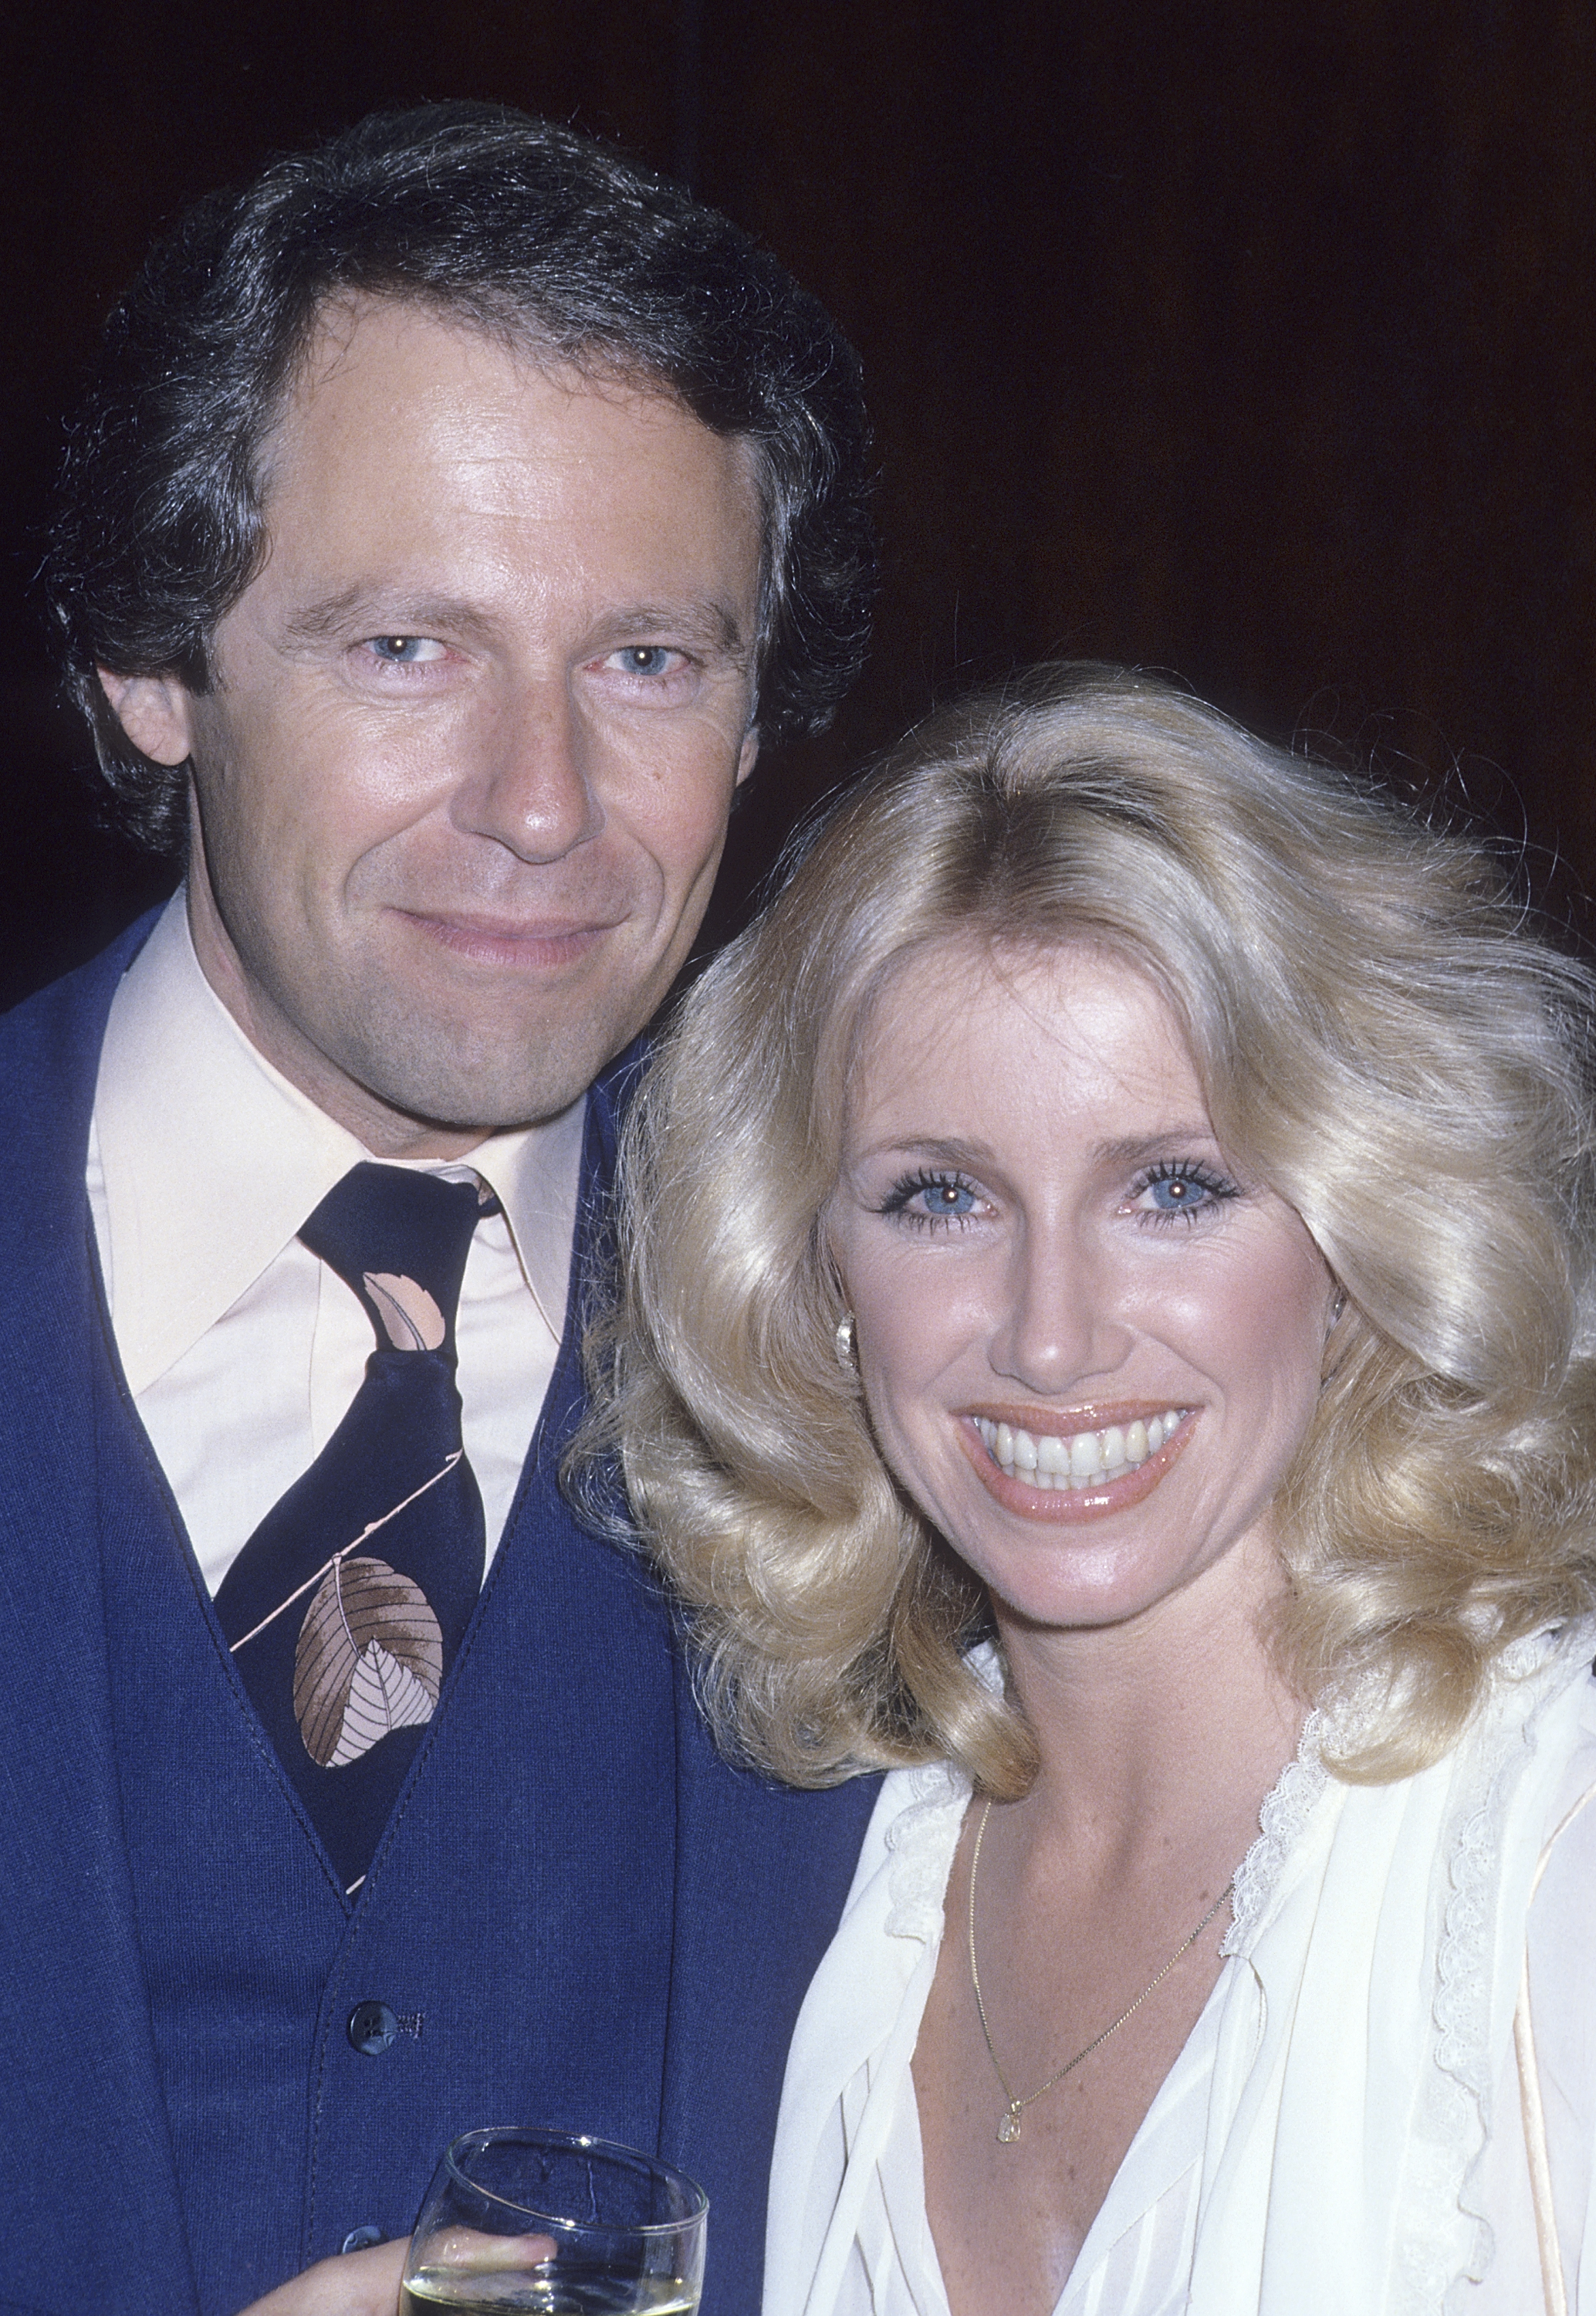 Suzanne Somers and husband Alan Hamel attend the 15th Annual National Association of Television Program Executives (NATPE) Convention - Iris Awards Banquet on March 4, 1978 at the Bonaventure Hotel in Los Angeles, California | Source: Getty Images